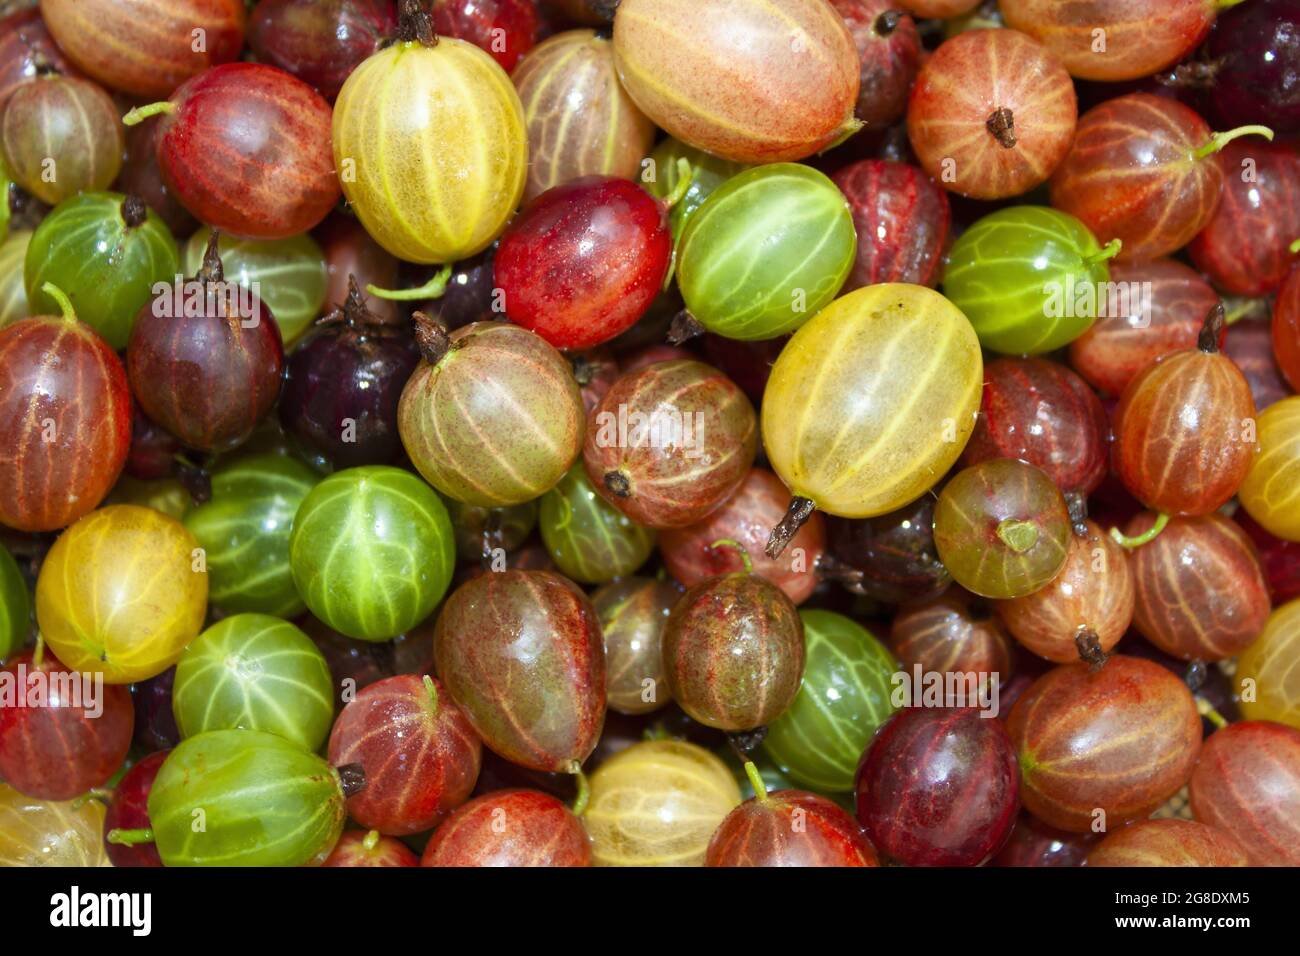 ripe-bright-sweet-fresh-gooseberries-of-different-colors-yellow-red-green-burgundy-close-up-2G8DXM5.jpg